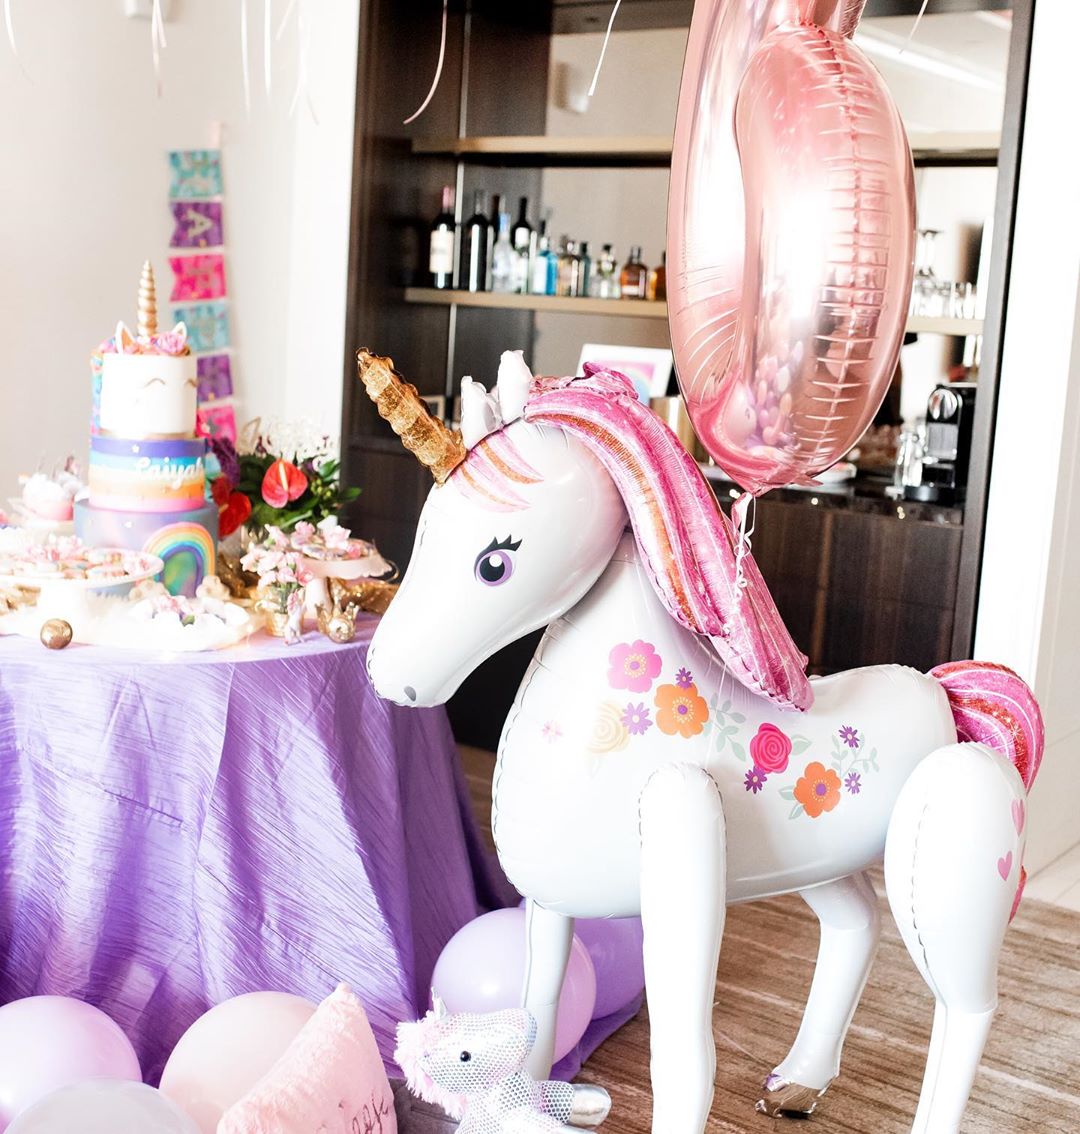 Monica Threw Her Daughter Laiyah A "Sweet Six" Birthday Party With All Of Her Besties